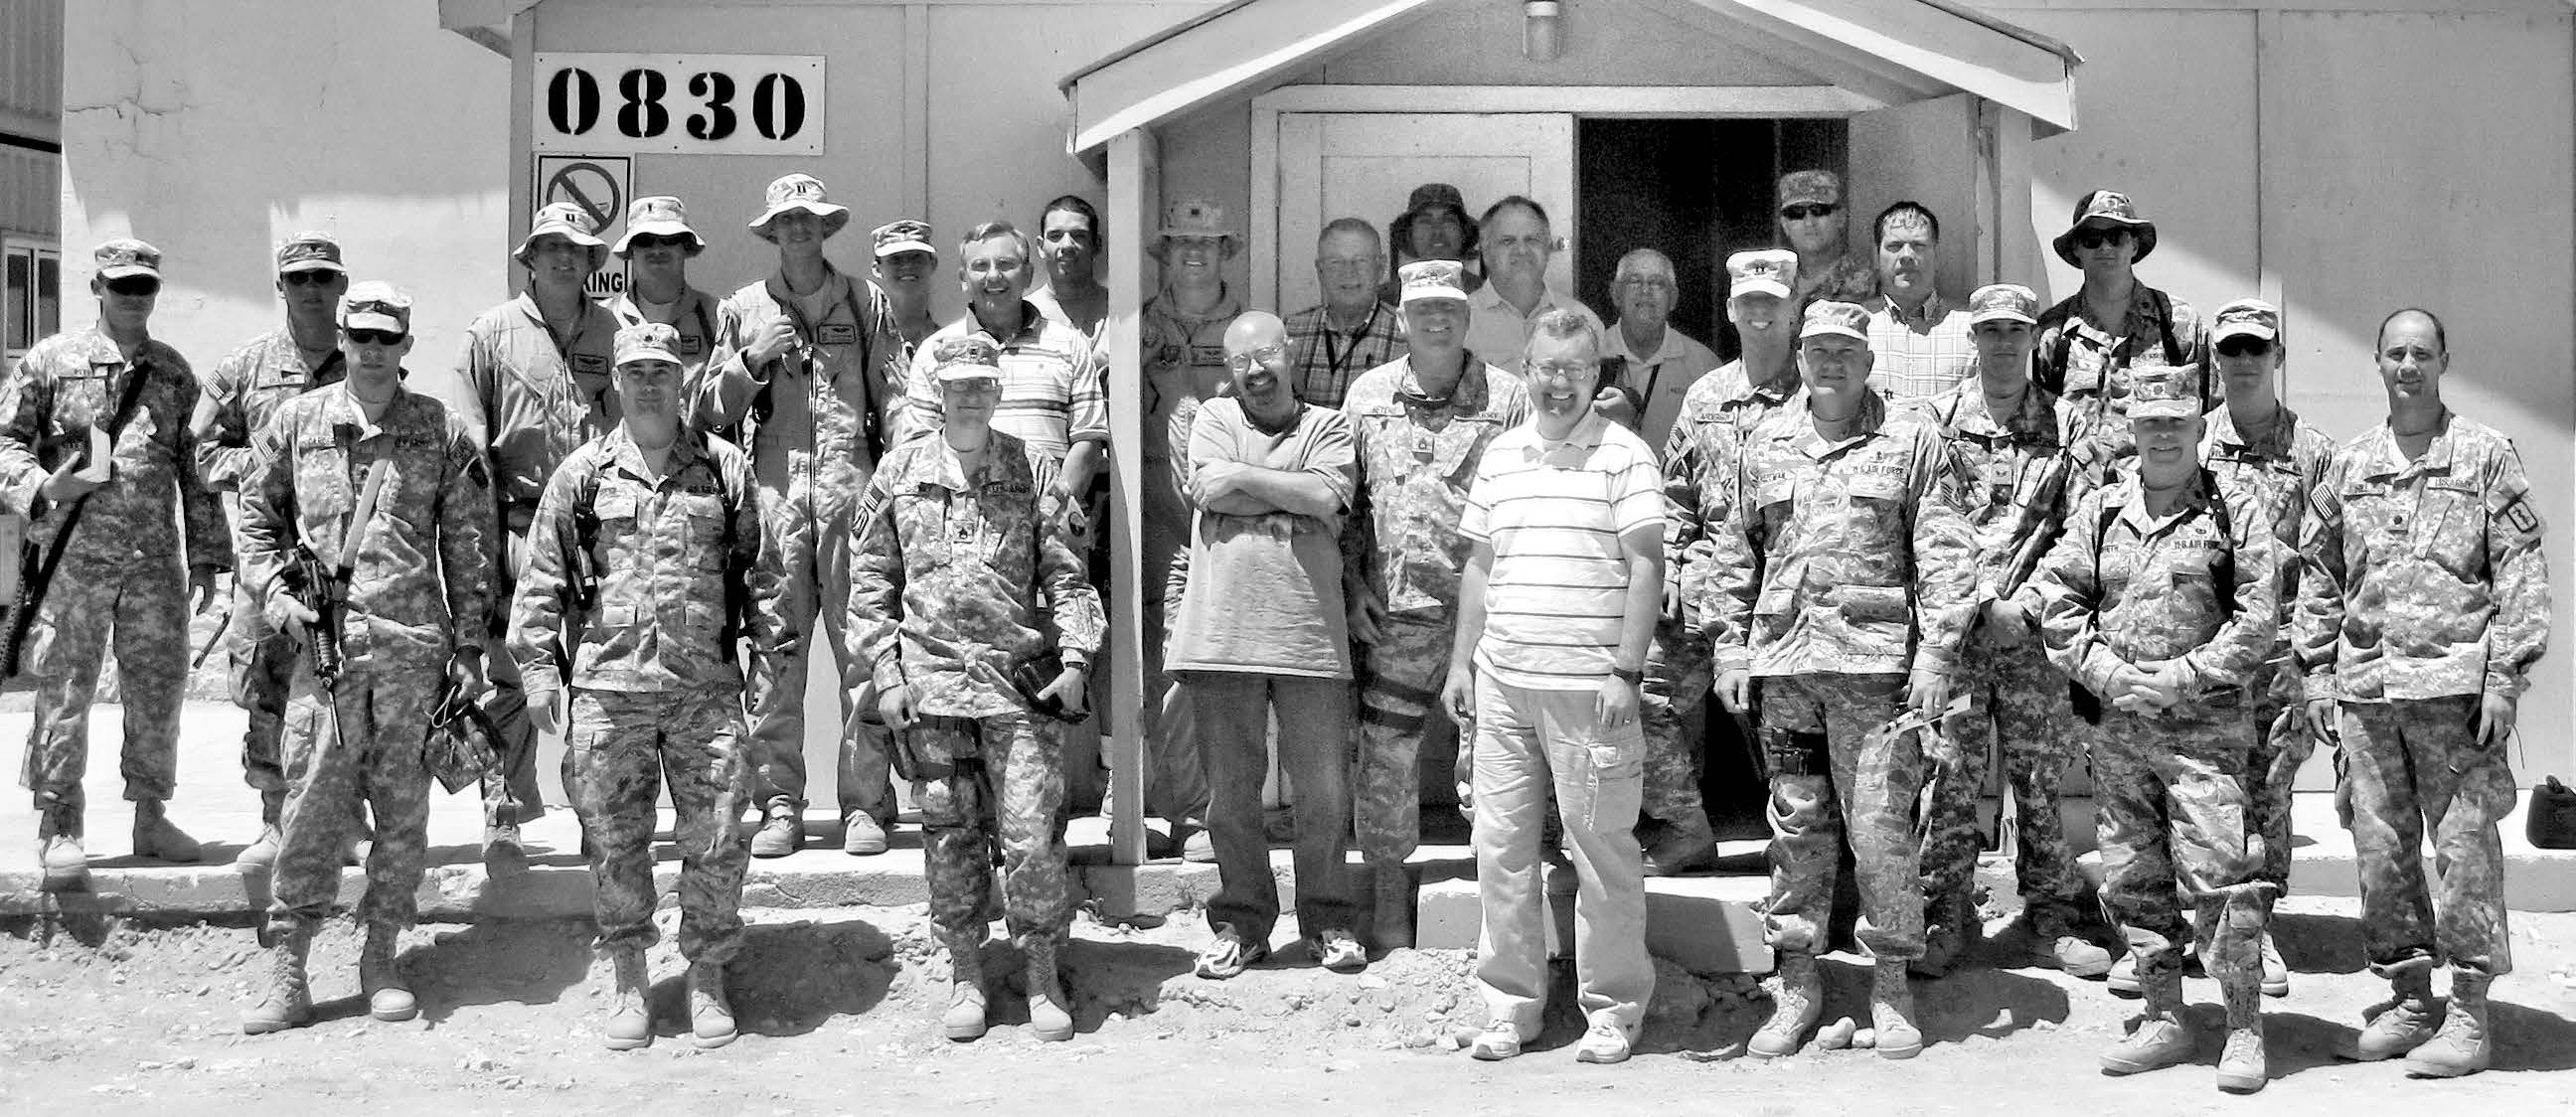 Bagram Latter-day Saint branch assembled in front of the chapel annex after church services at Bagram, Afghanistan, in July 2009. Courtesy of Richard Belcher.